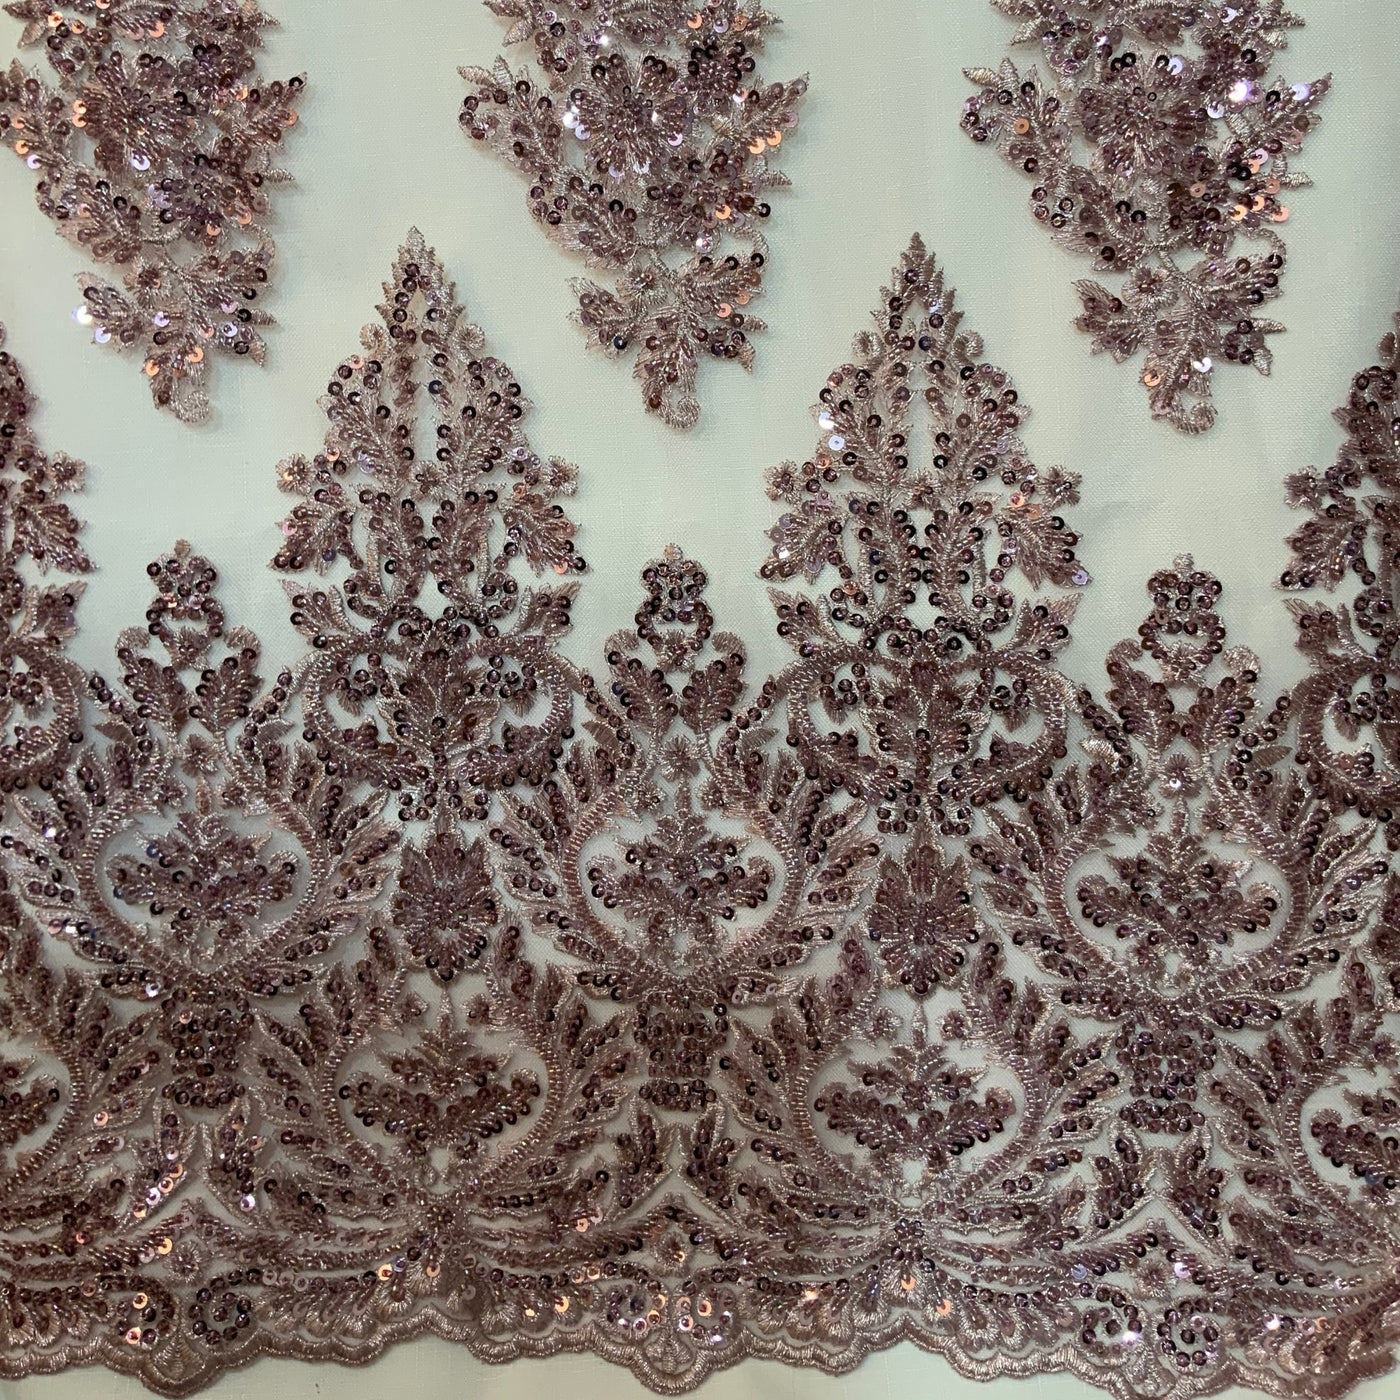 Beaded Lace Fabric Embroidered on 100% Polyester Net Mesh | Lace USA - GD-824